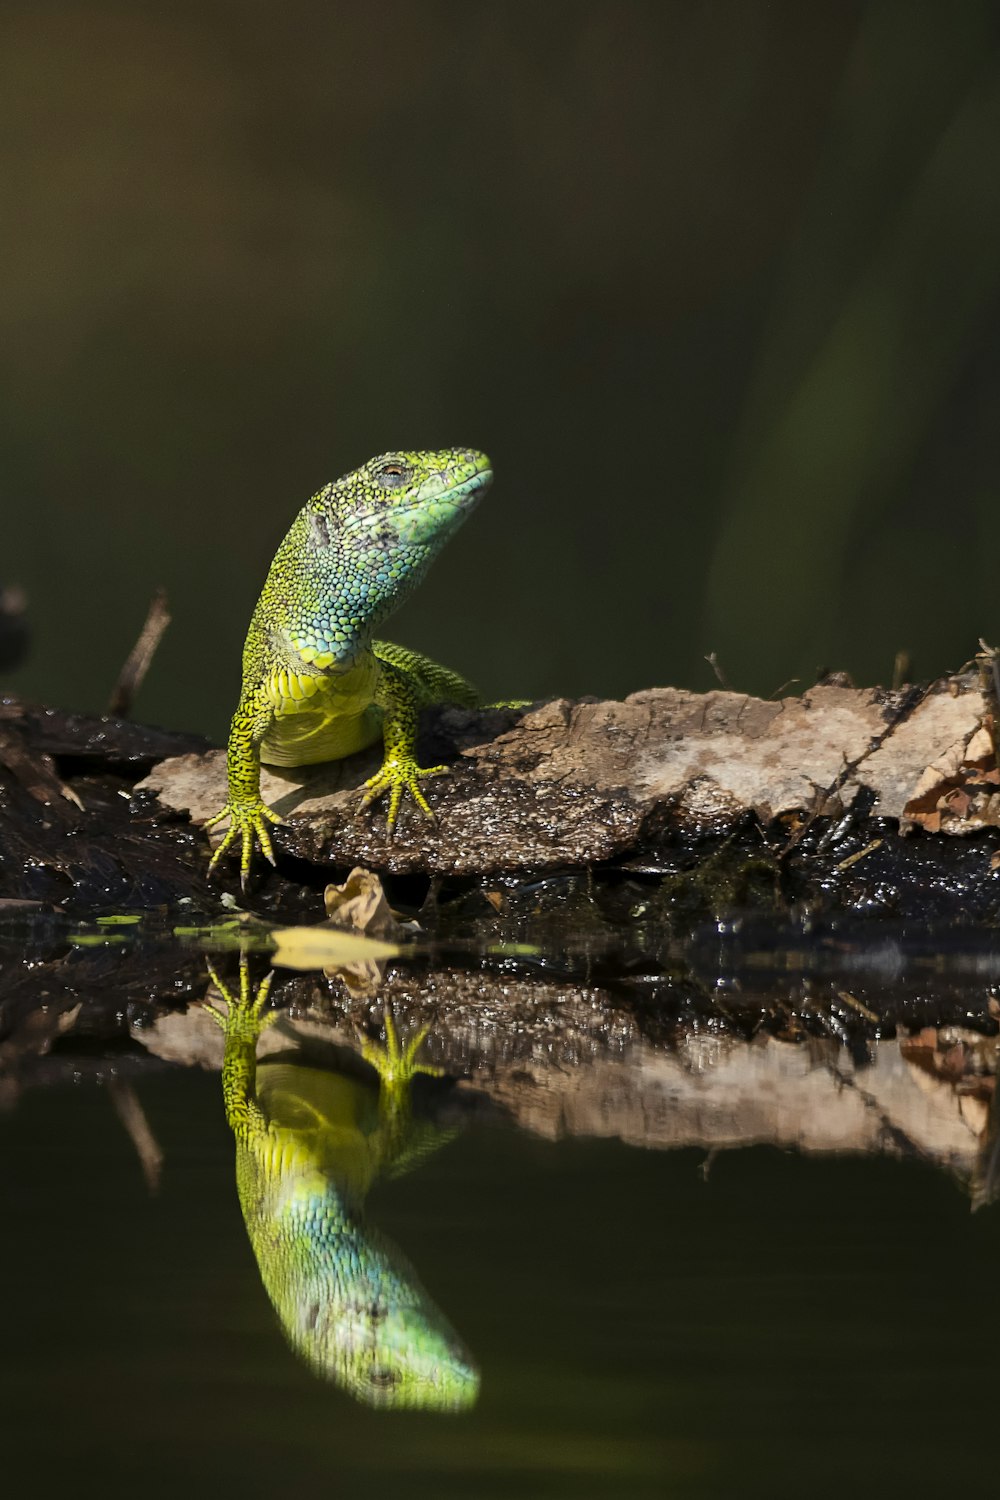 a green lizard sitting on a log in the water